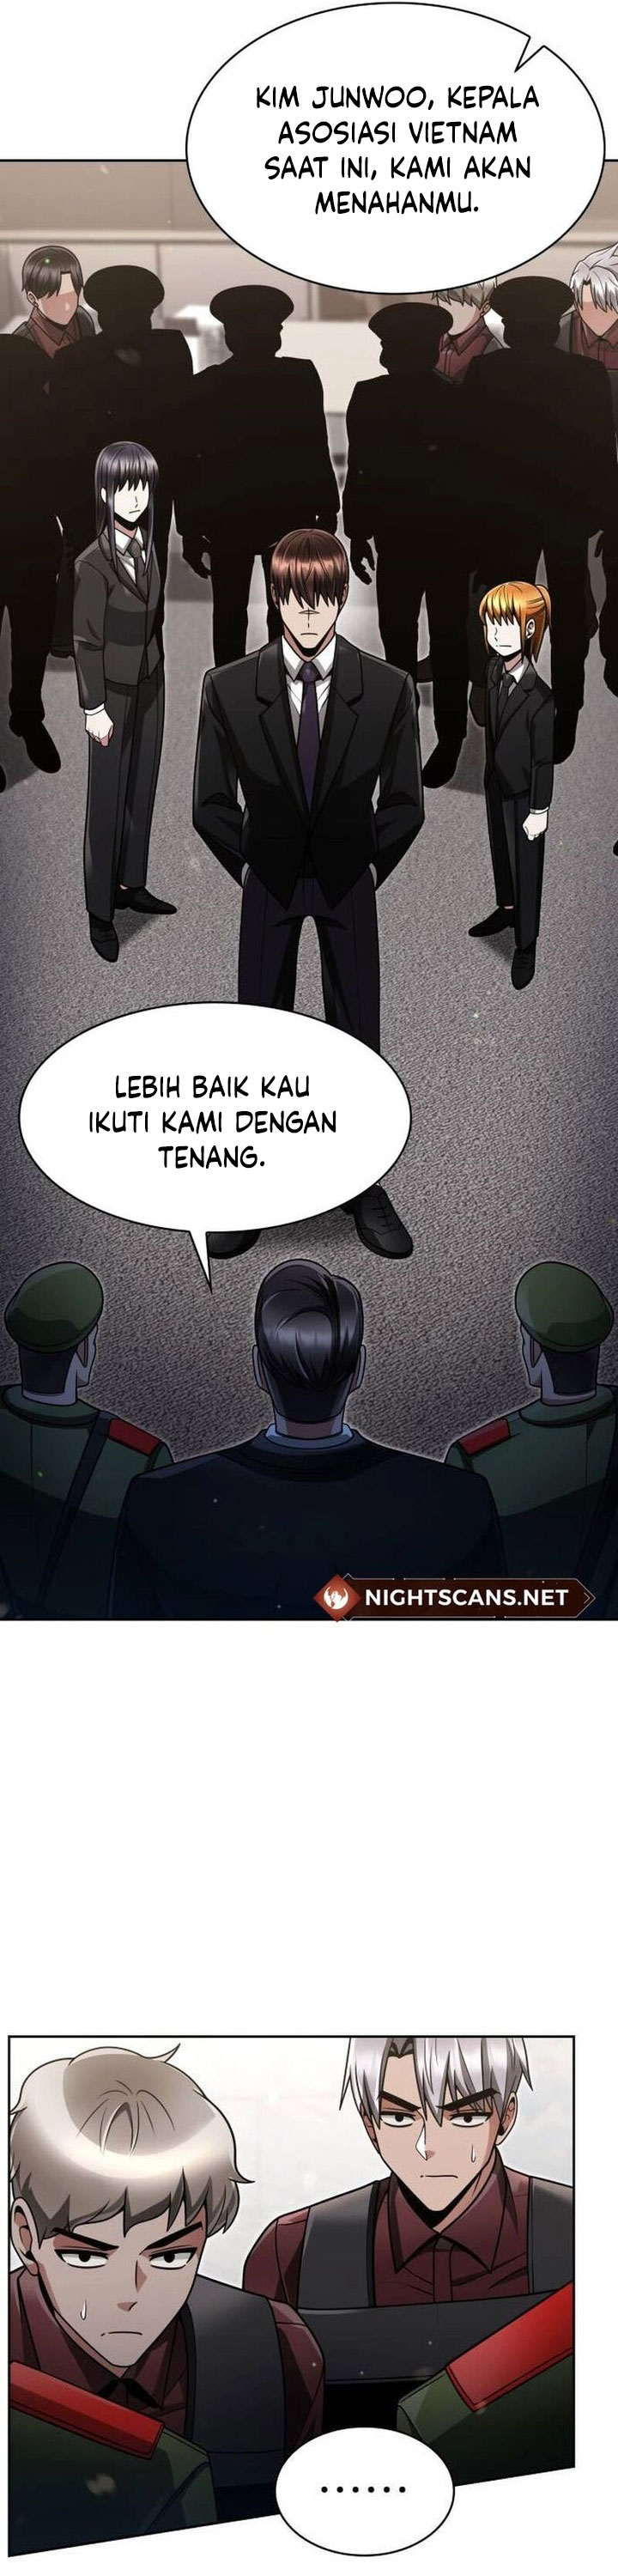 Dilarang COPAS - situs resmi www.mangacanblog.com - Komik clever cleaning life of the returned genius hunter 063 - chapter 63 64 Indonesia clever cleaning life of the returned genius hunter 063 - chapter 63 Terbaru 20|Baca Manga Komik Indonesia|Mangacan